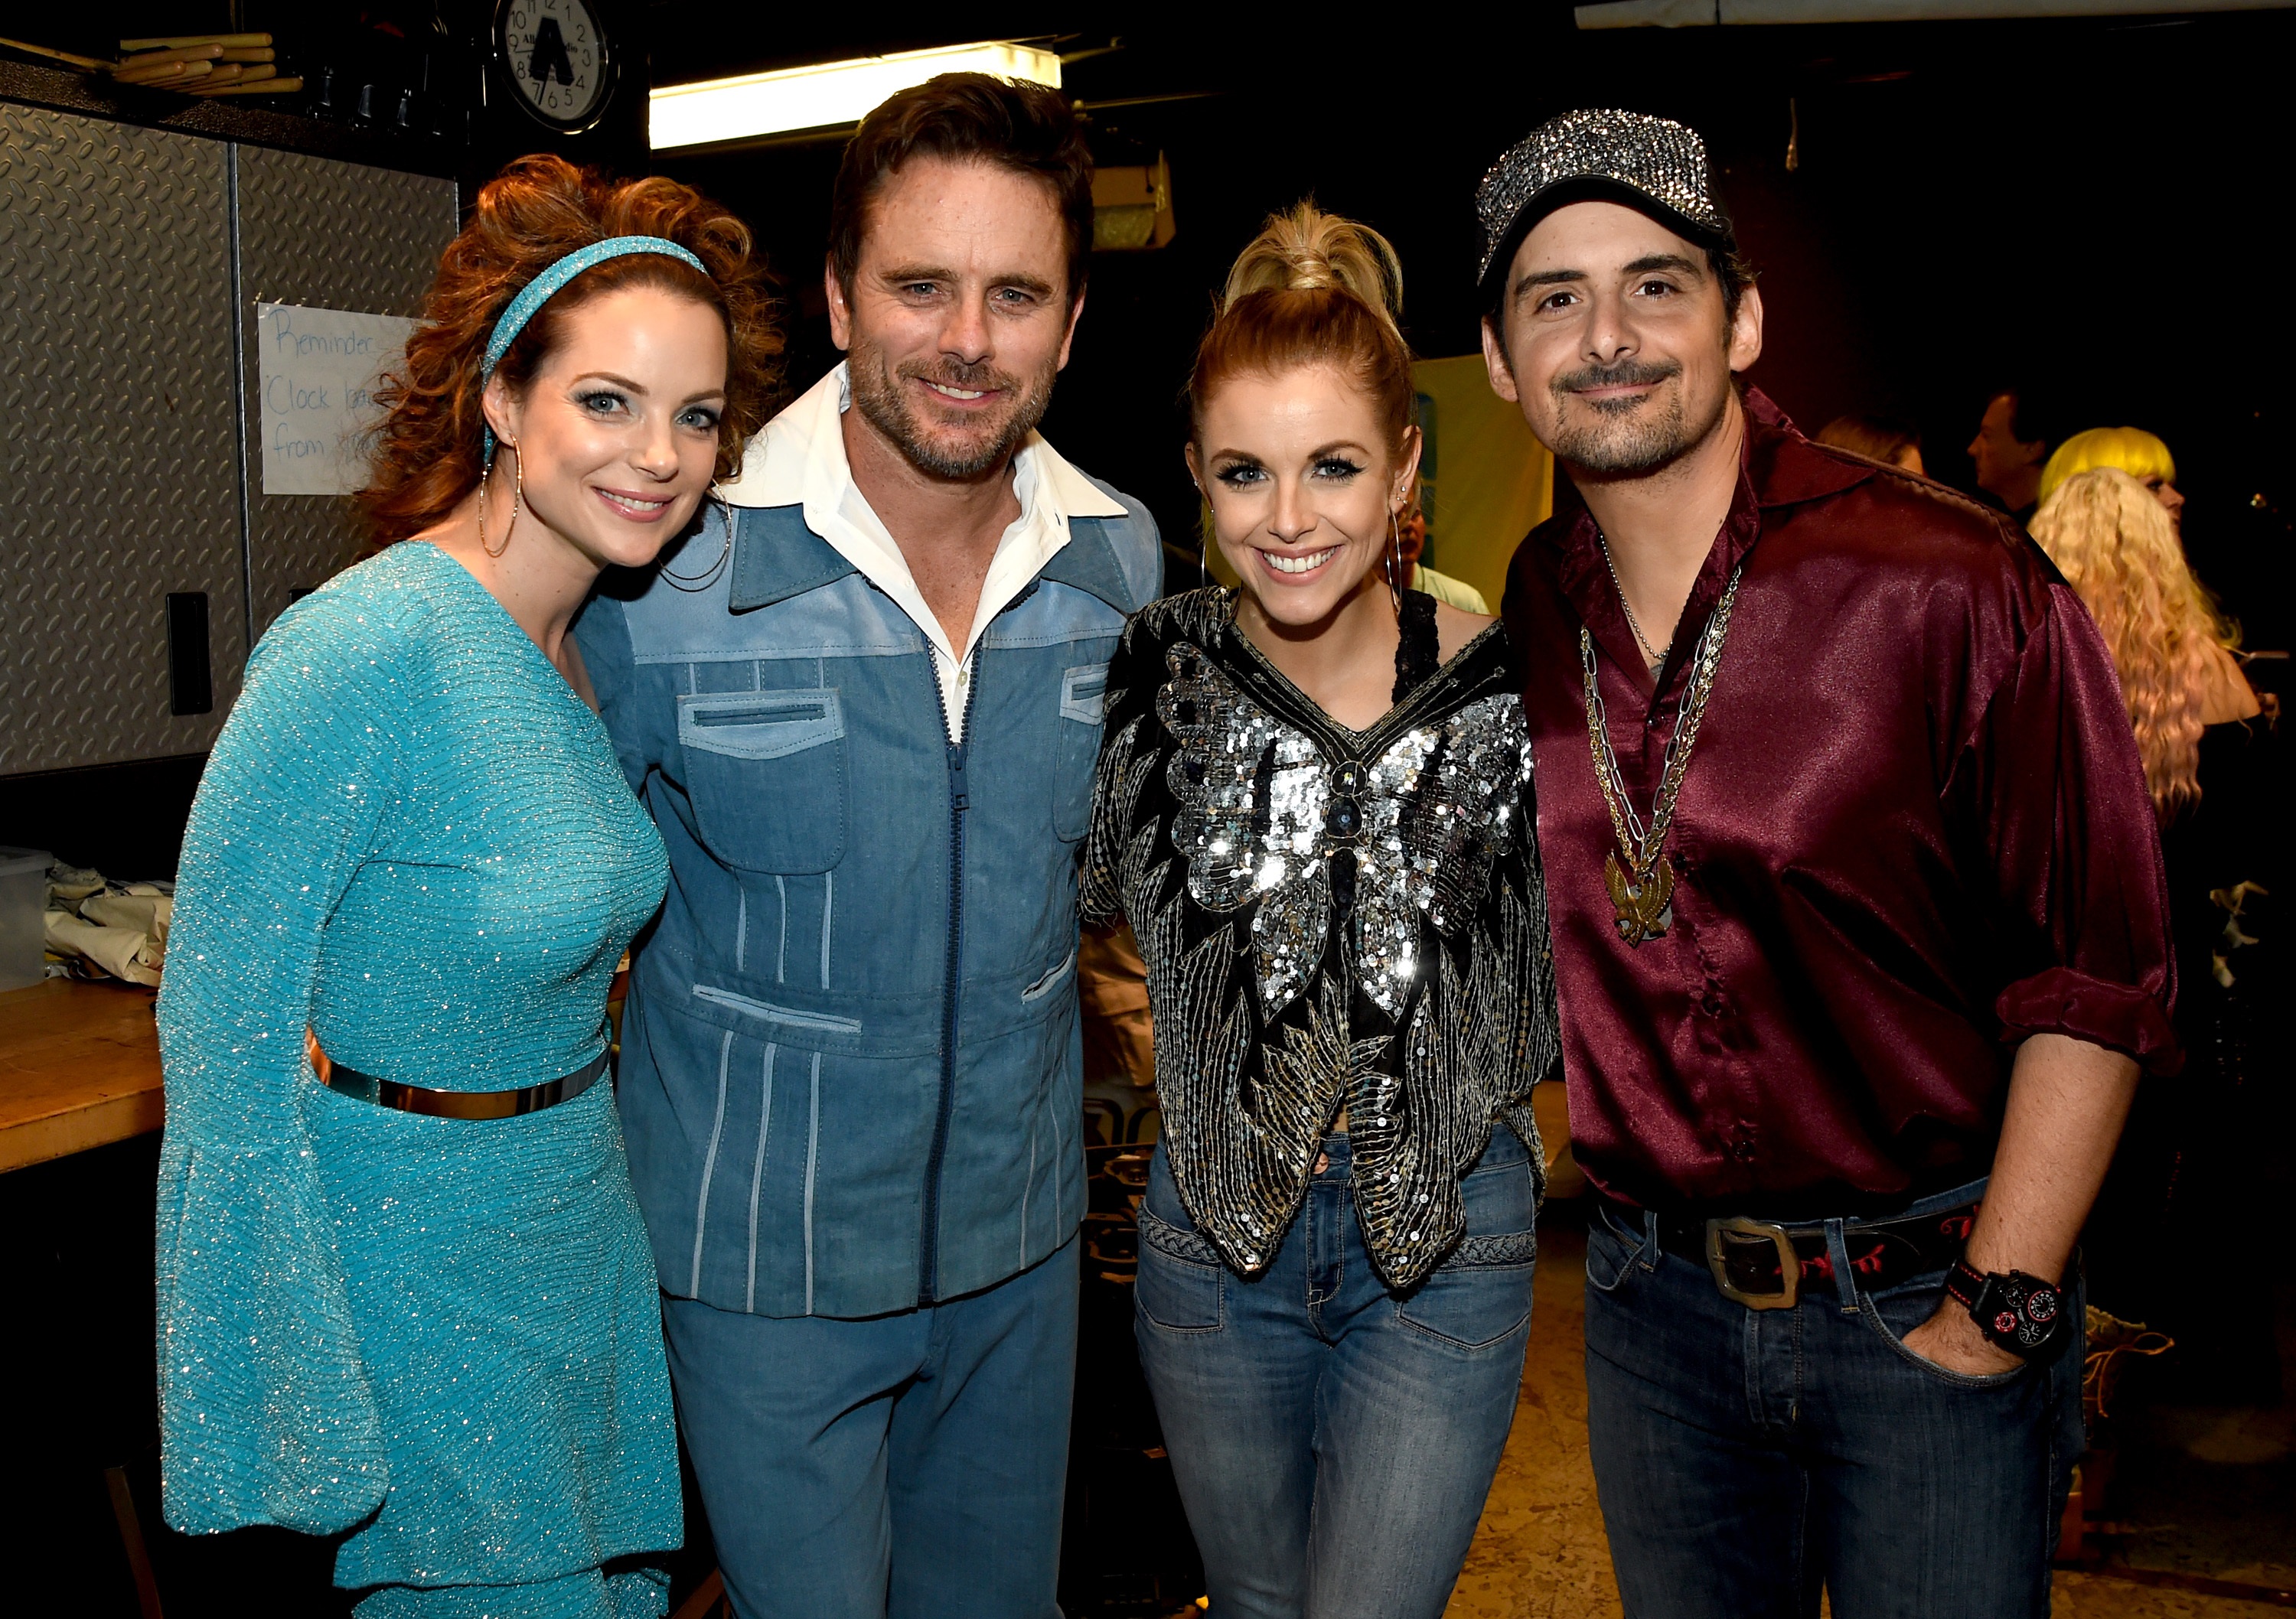 Pictured L-R: Kimberly Williams-Paisley, Charles Esten, Lindsay Ell, Brad Paisley; Photo by Rick Diamond/Getty Images for Alzheimer's Association